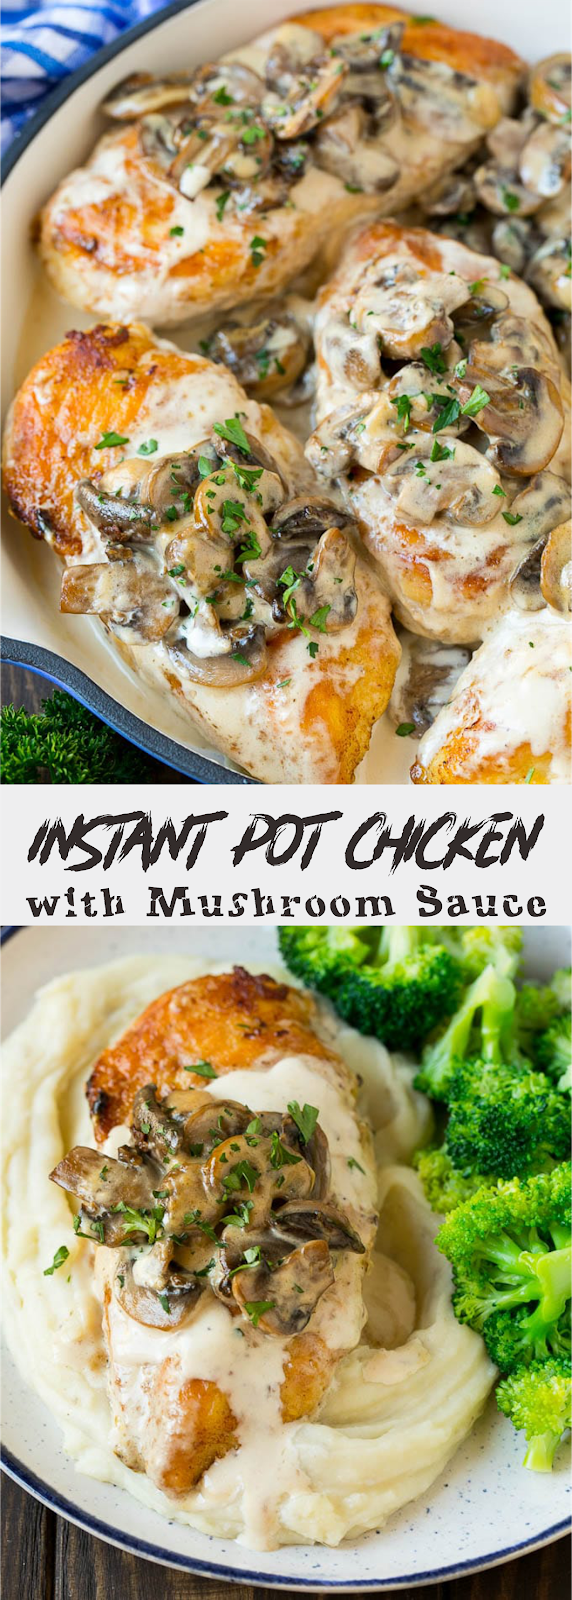 Instant Pot Chicken with Mushroom Sauce | Think food